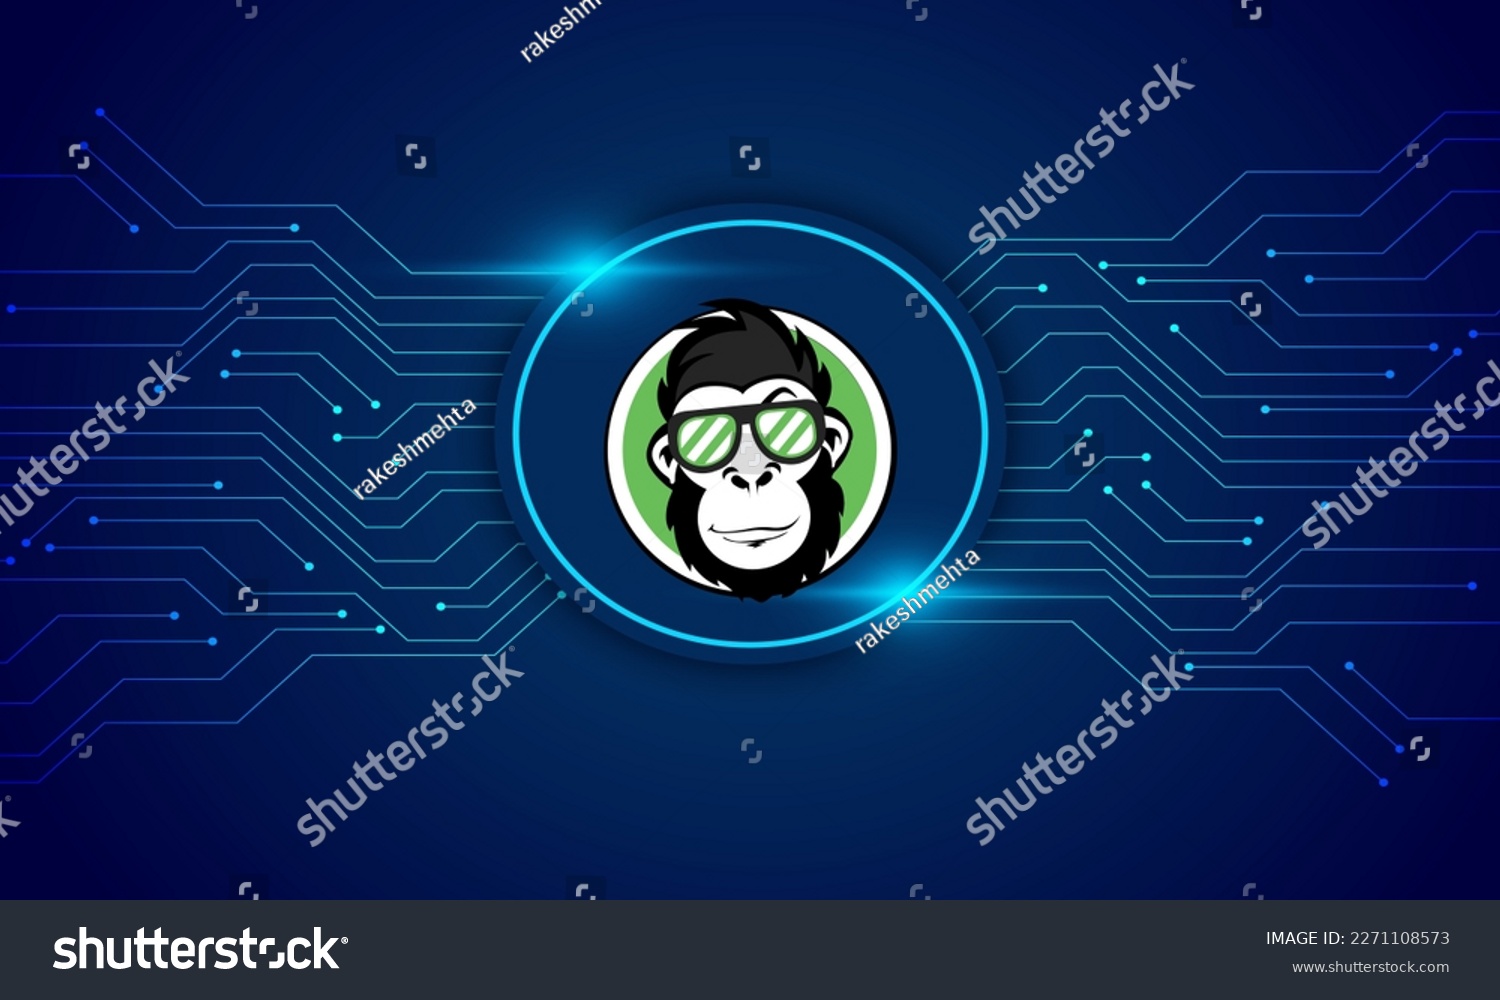 SVG of Ape Crypto  logo with crypto currency themed circle background design. Ape Coin (APE) Token  currency vector illustration blockchain technology concept  svg